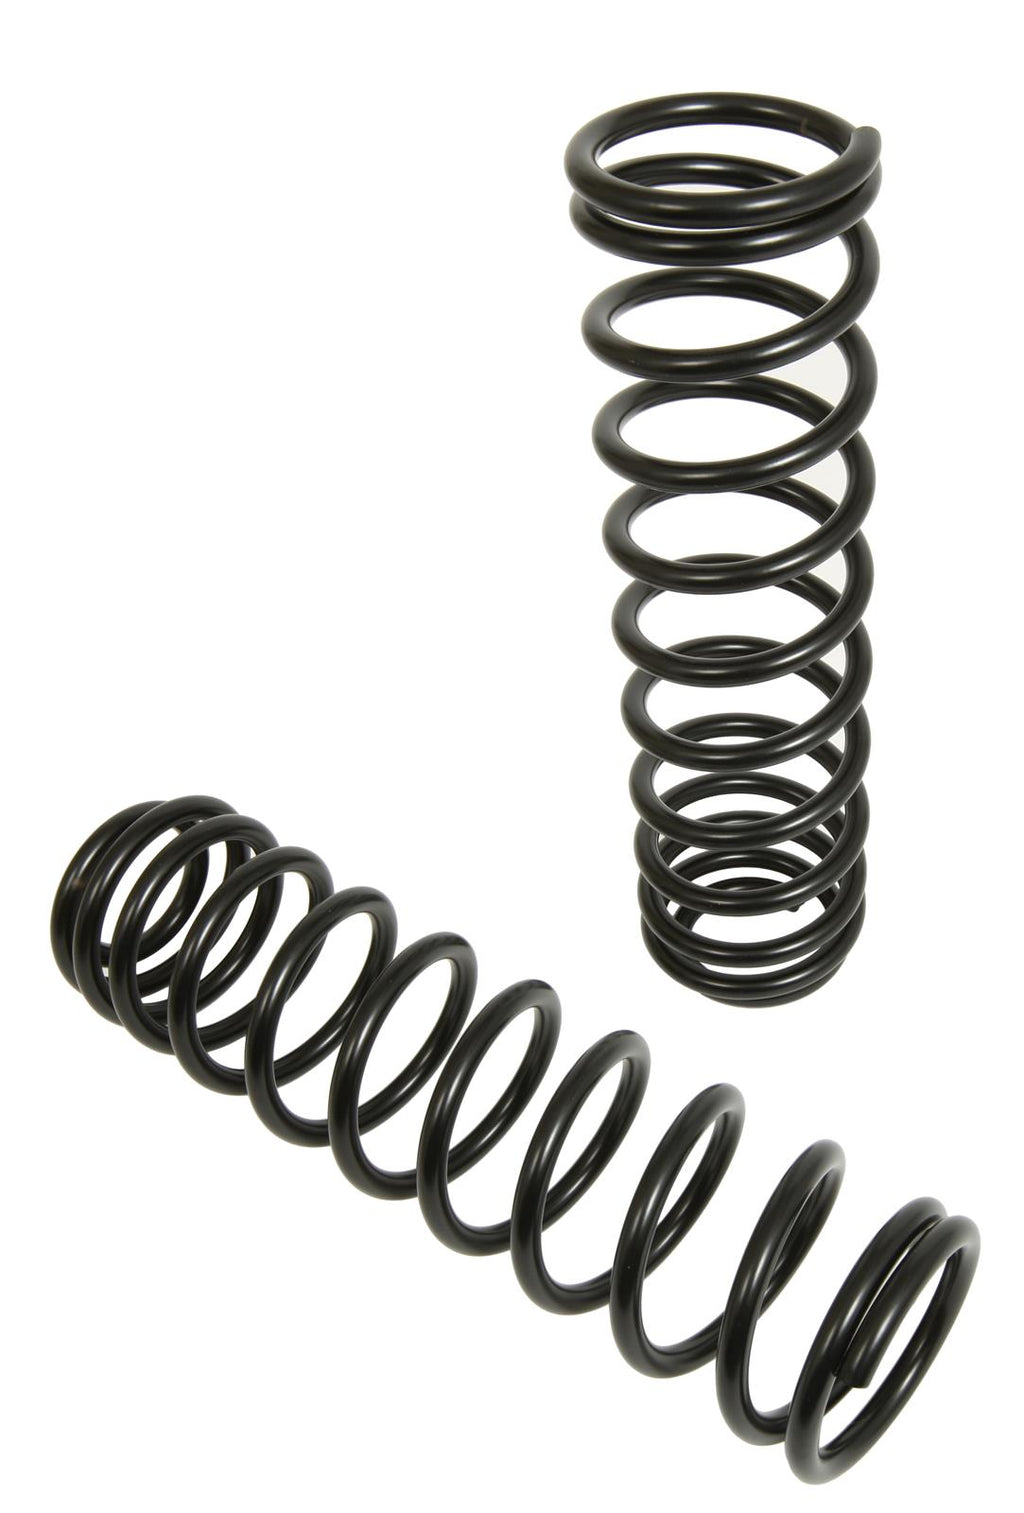 Rock Krawler Triple Rate Front 2.5" Lift Coil Springs For jeep Wrangler JL